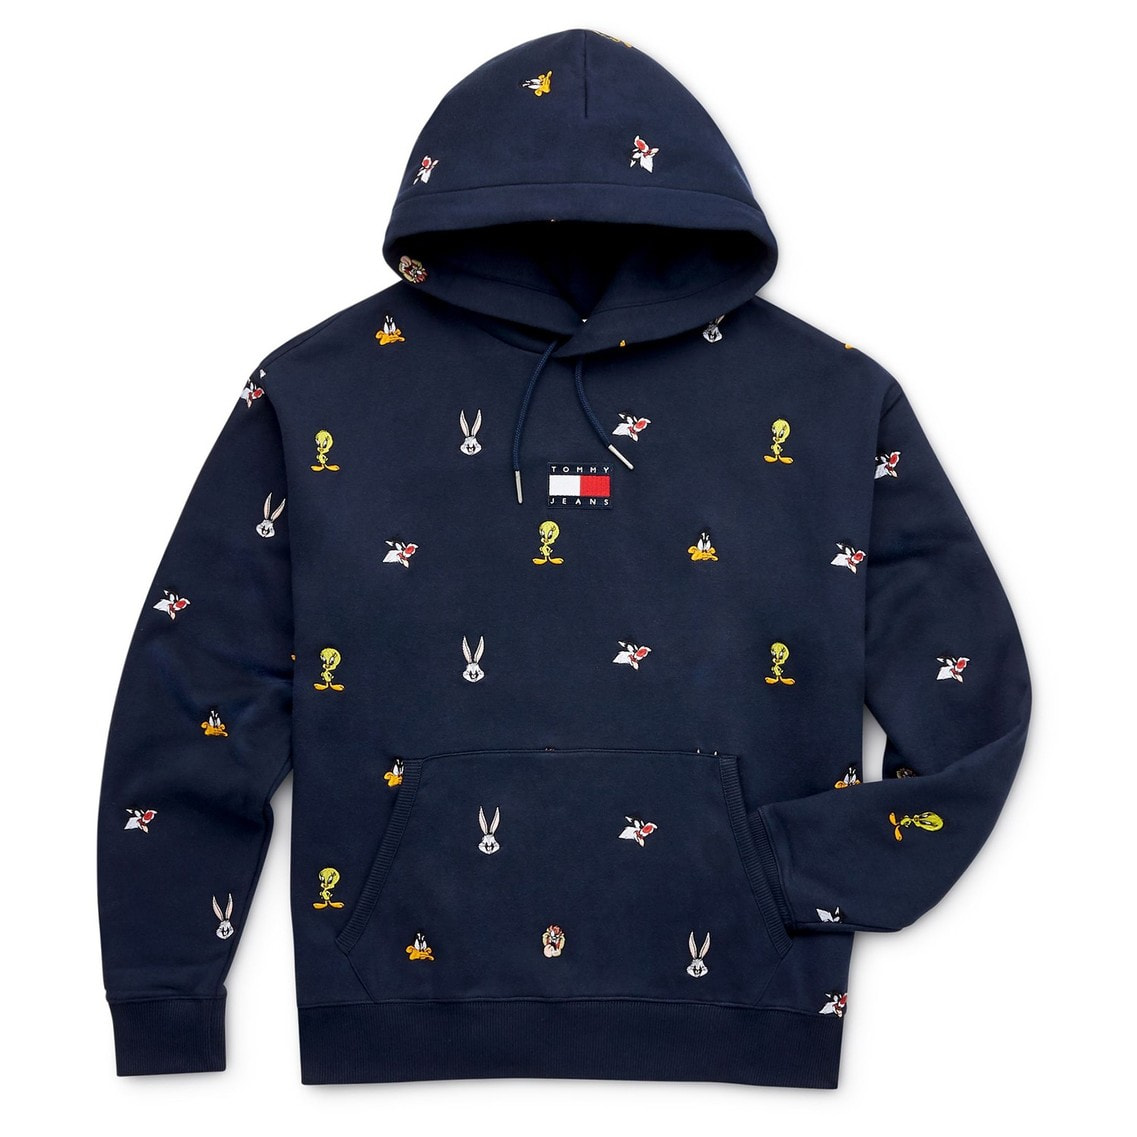 Tommy Jeans Looney Tunes Hoody Tommy Hilfiger Tommy Hilfiger トミー ヒルフィガー 公式オンラインストア